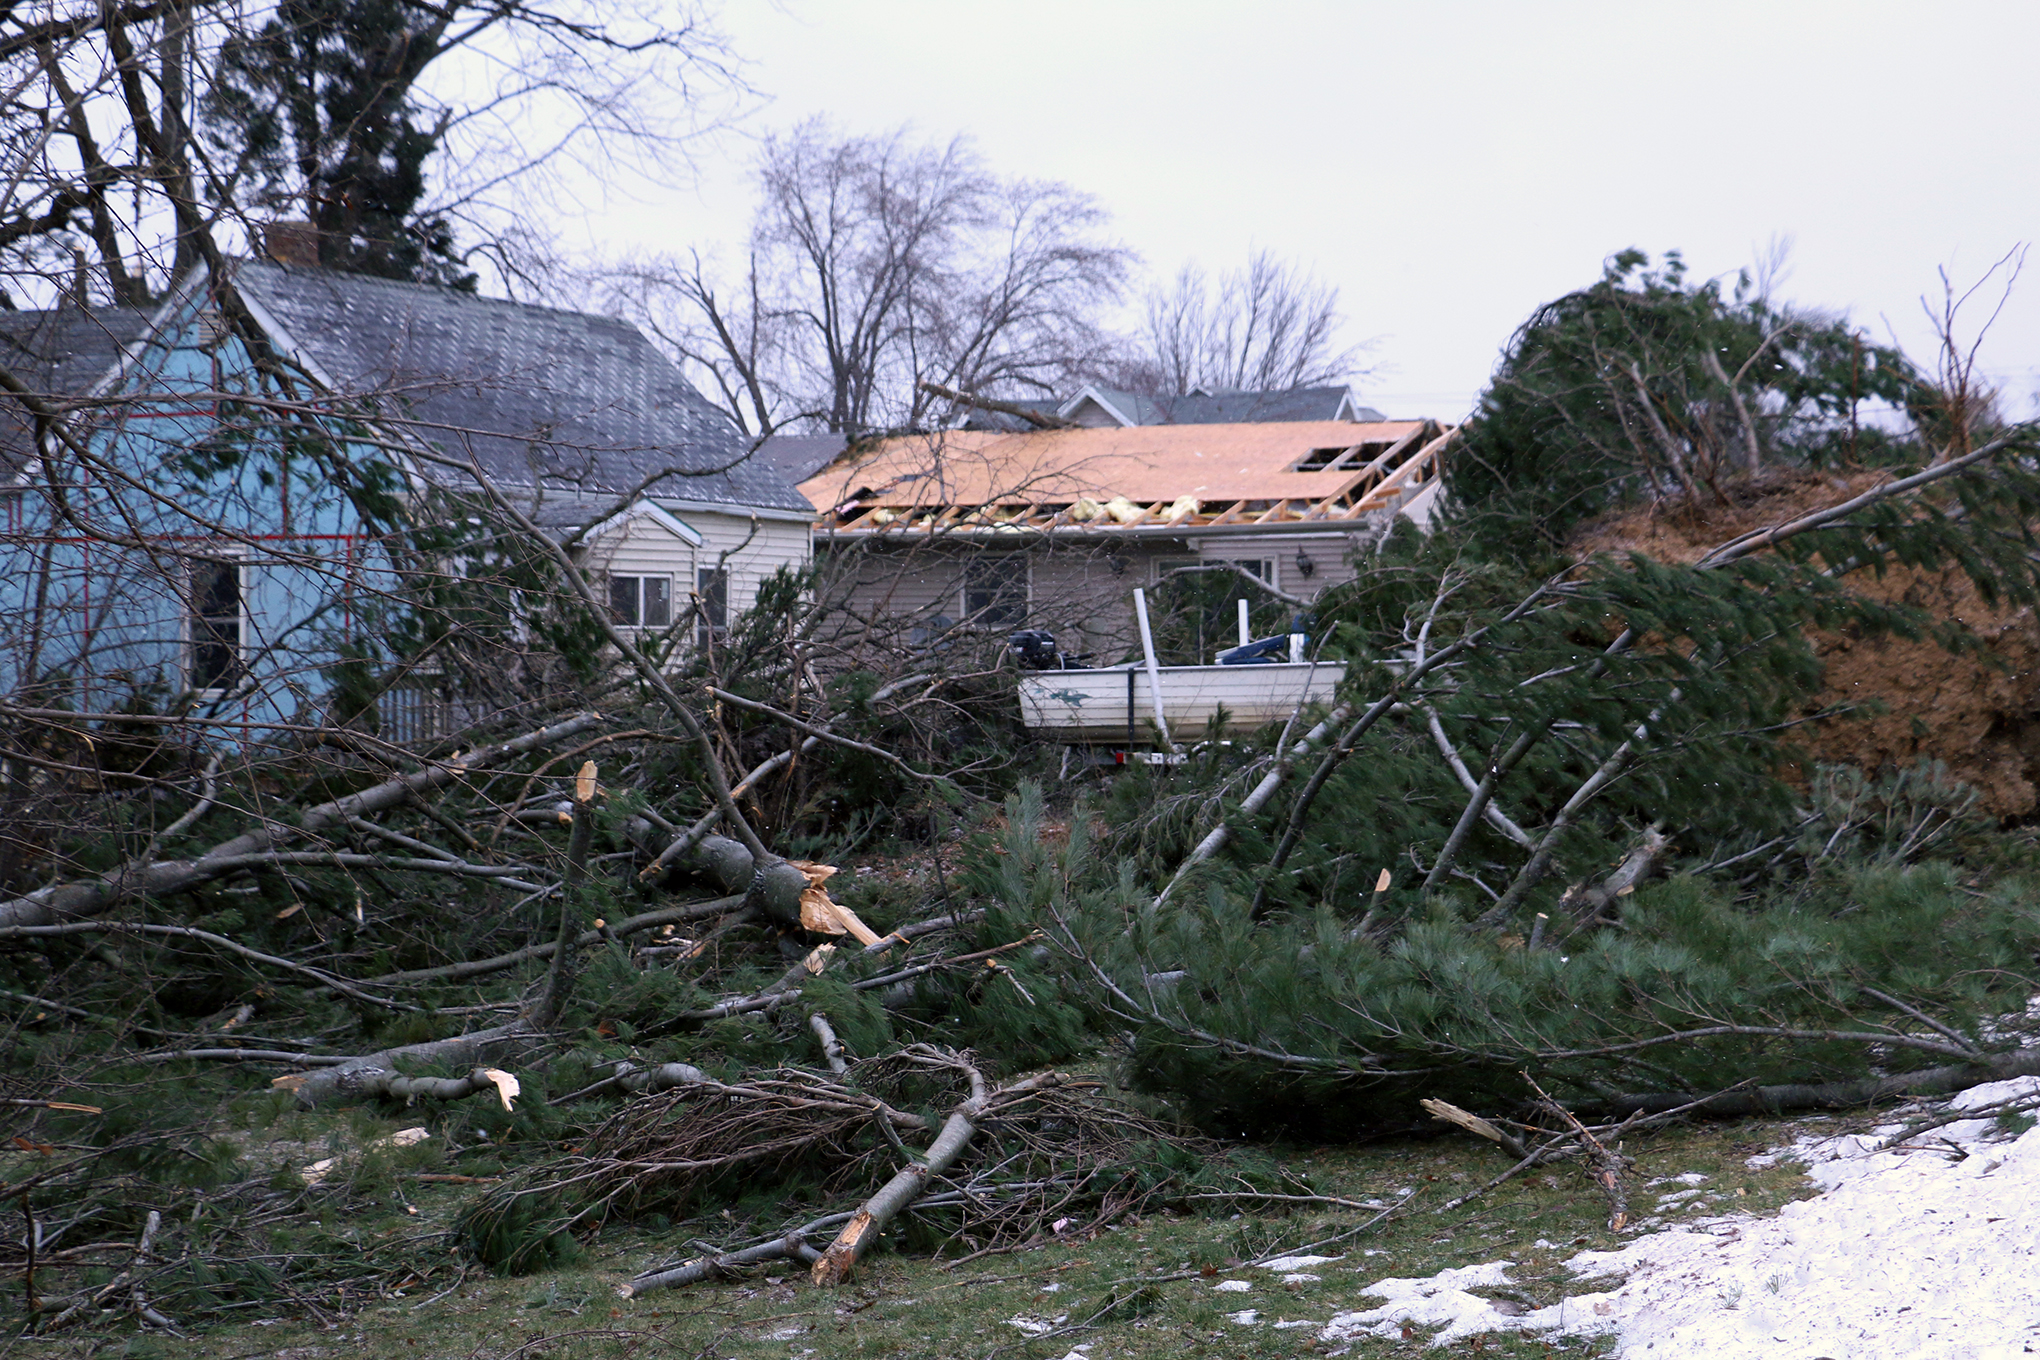 Storm damage, including downed trees, is seen in Stanley, Wis